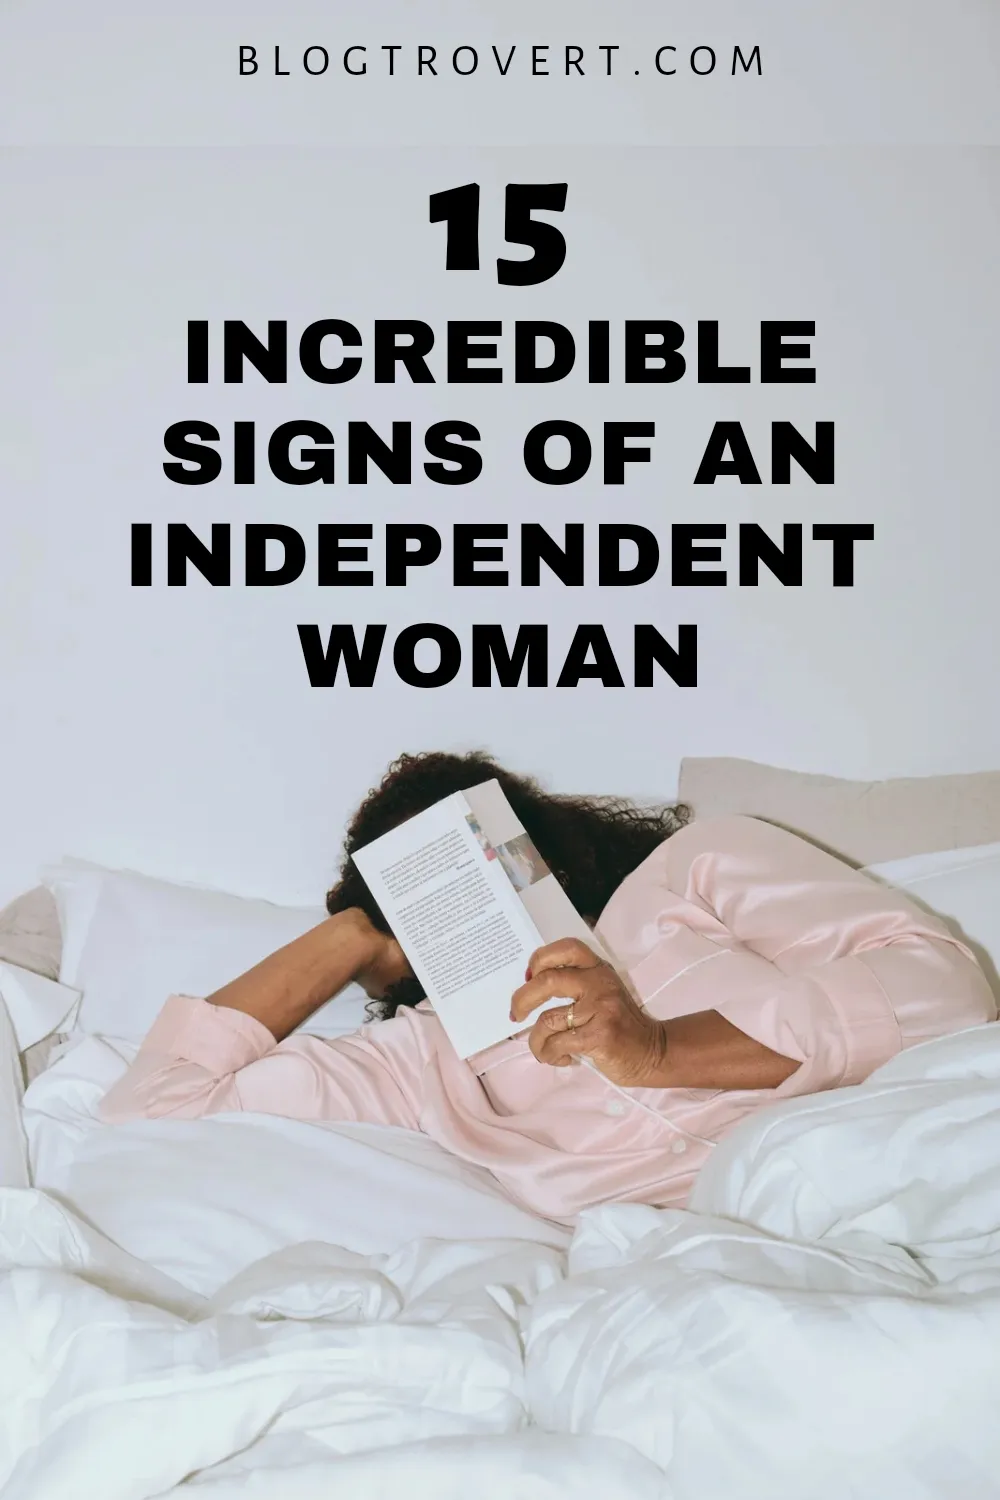 15 characteristics of an independent woman that will inspire you 2